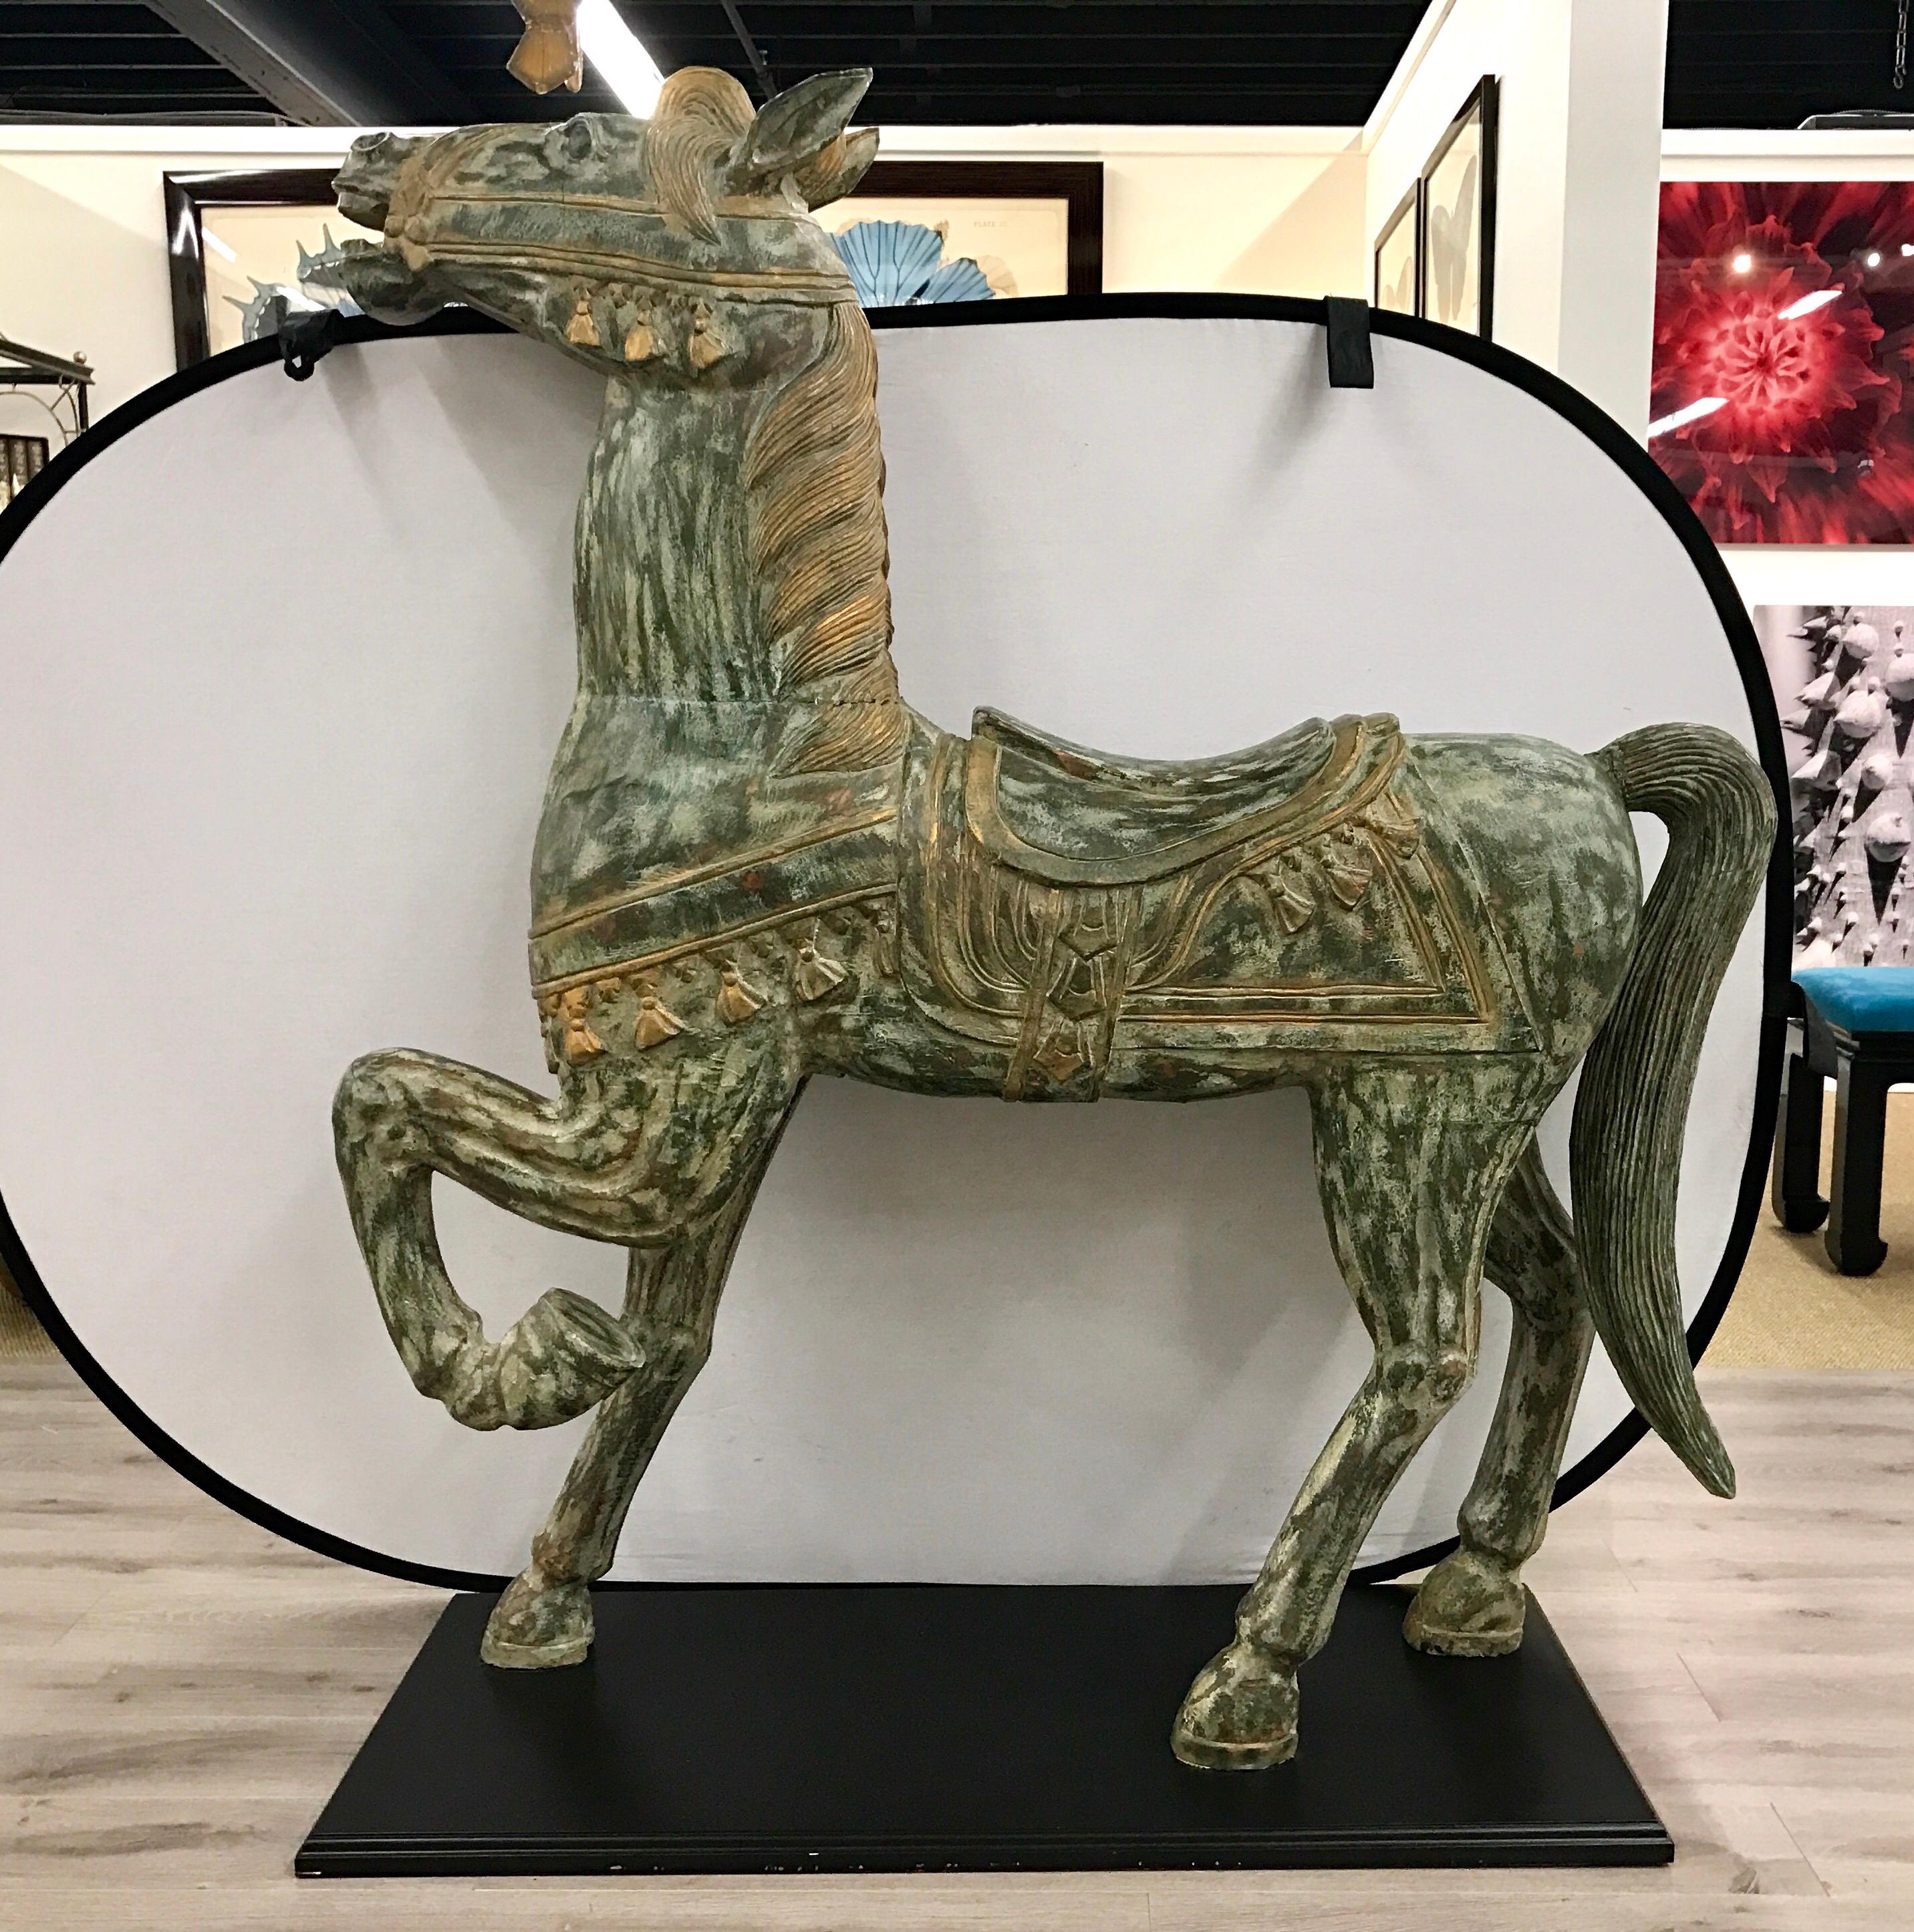 Standing just over five feet tall on a black mount, this hand-painted carved horse is quite unusual.